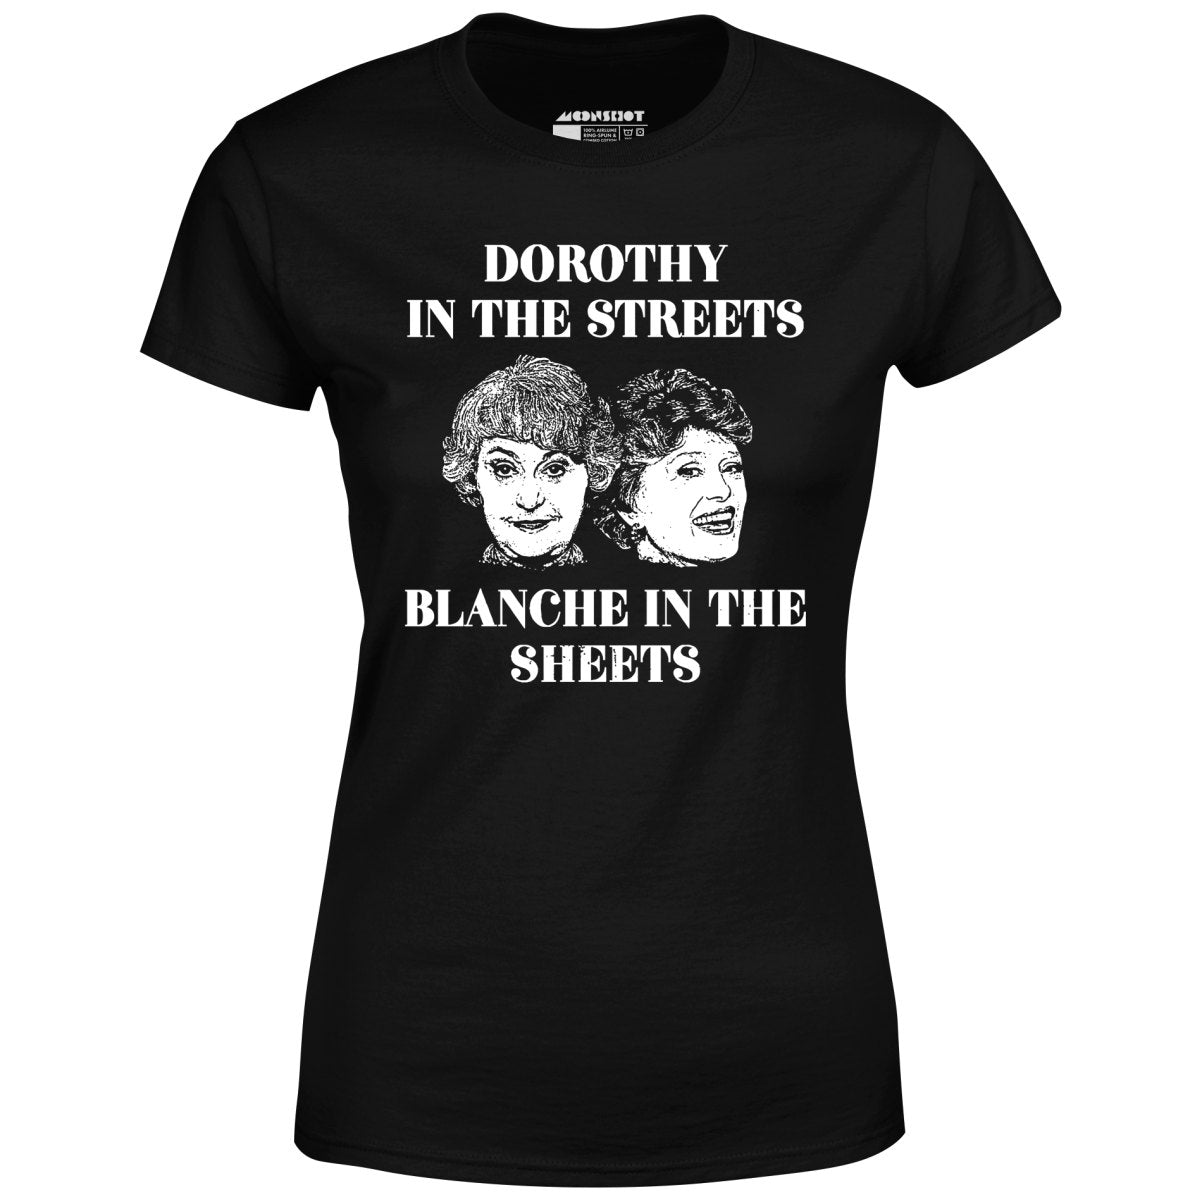 Dorothy in the Streets Blanche in the Sheets - Women's T-Shirt